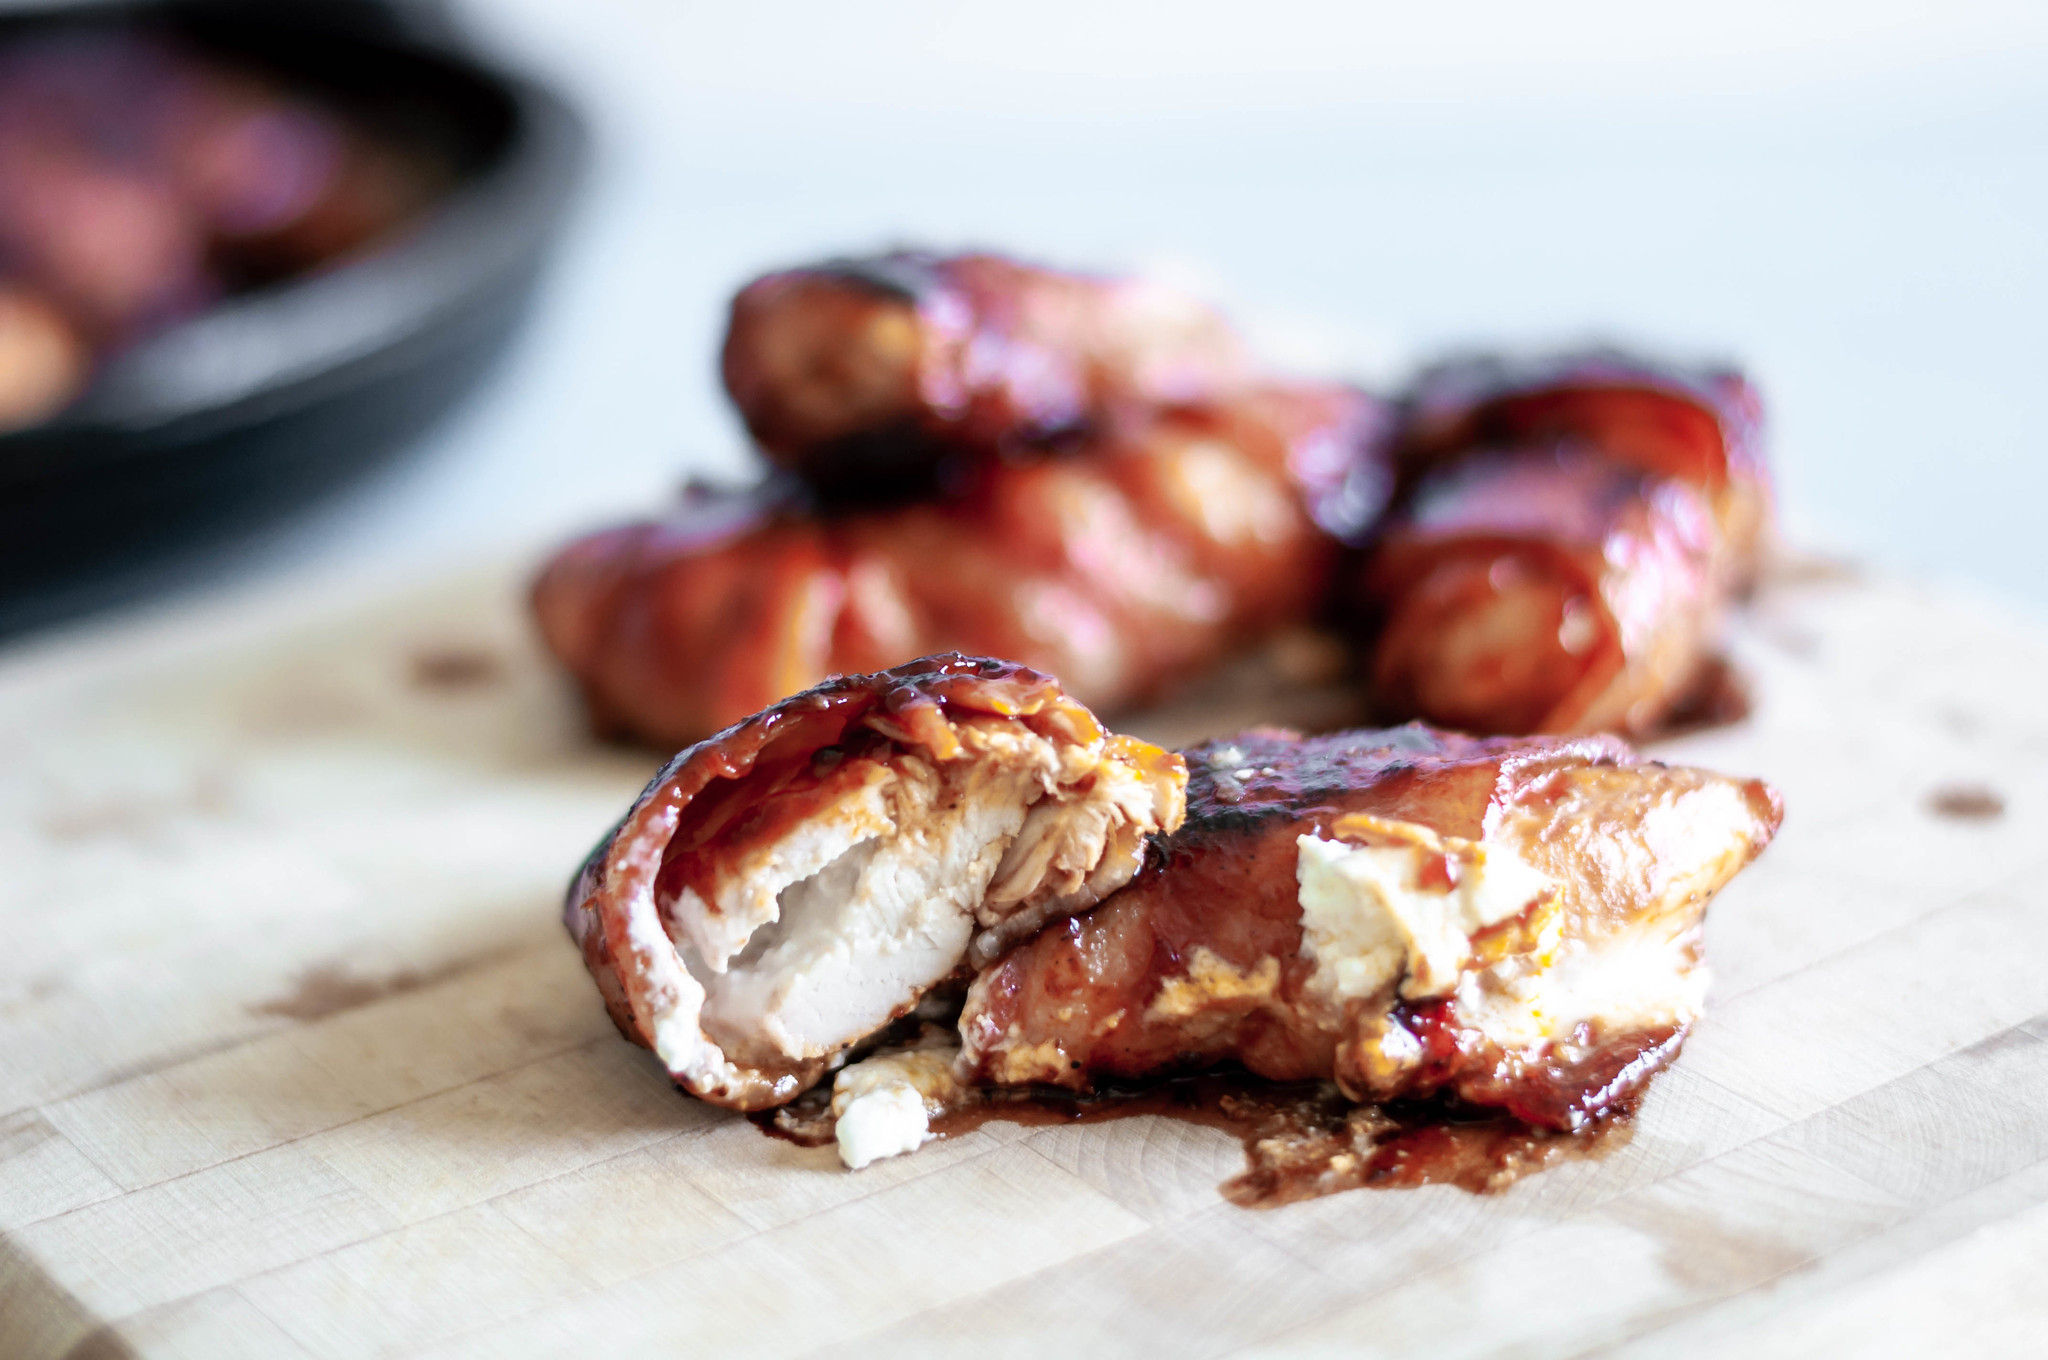 BBQ Bacon Wrapped Chicken smothered in barbecue sauce and stuffed with cream cheese makes the ultimate, flavorful dinner. Simple and delicious.